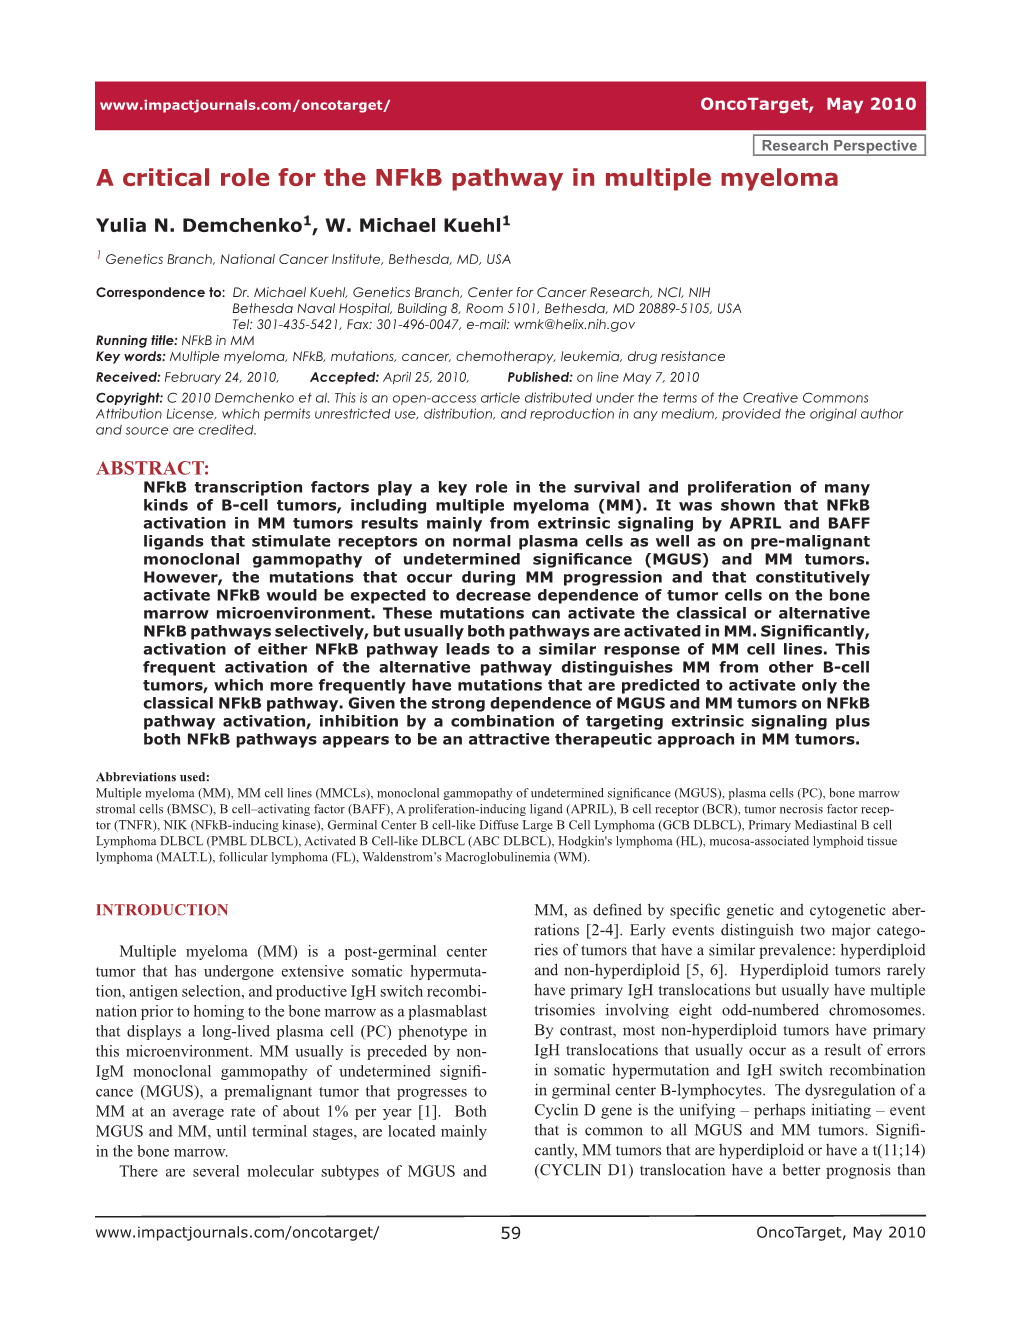 A Critical Role for the Nfkb Pathway in Multiple Myeloma